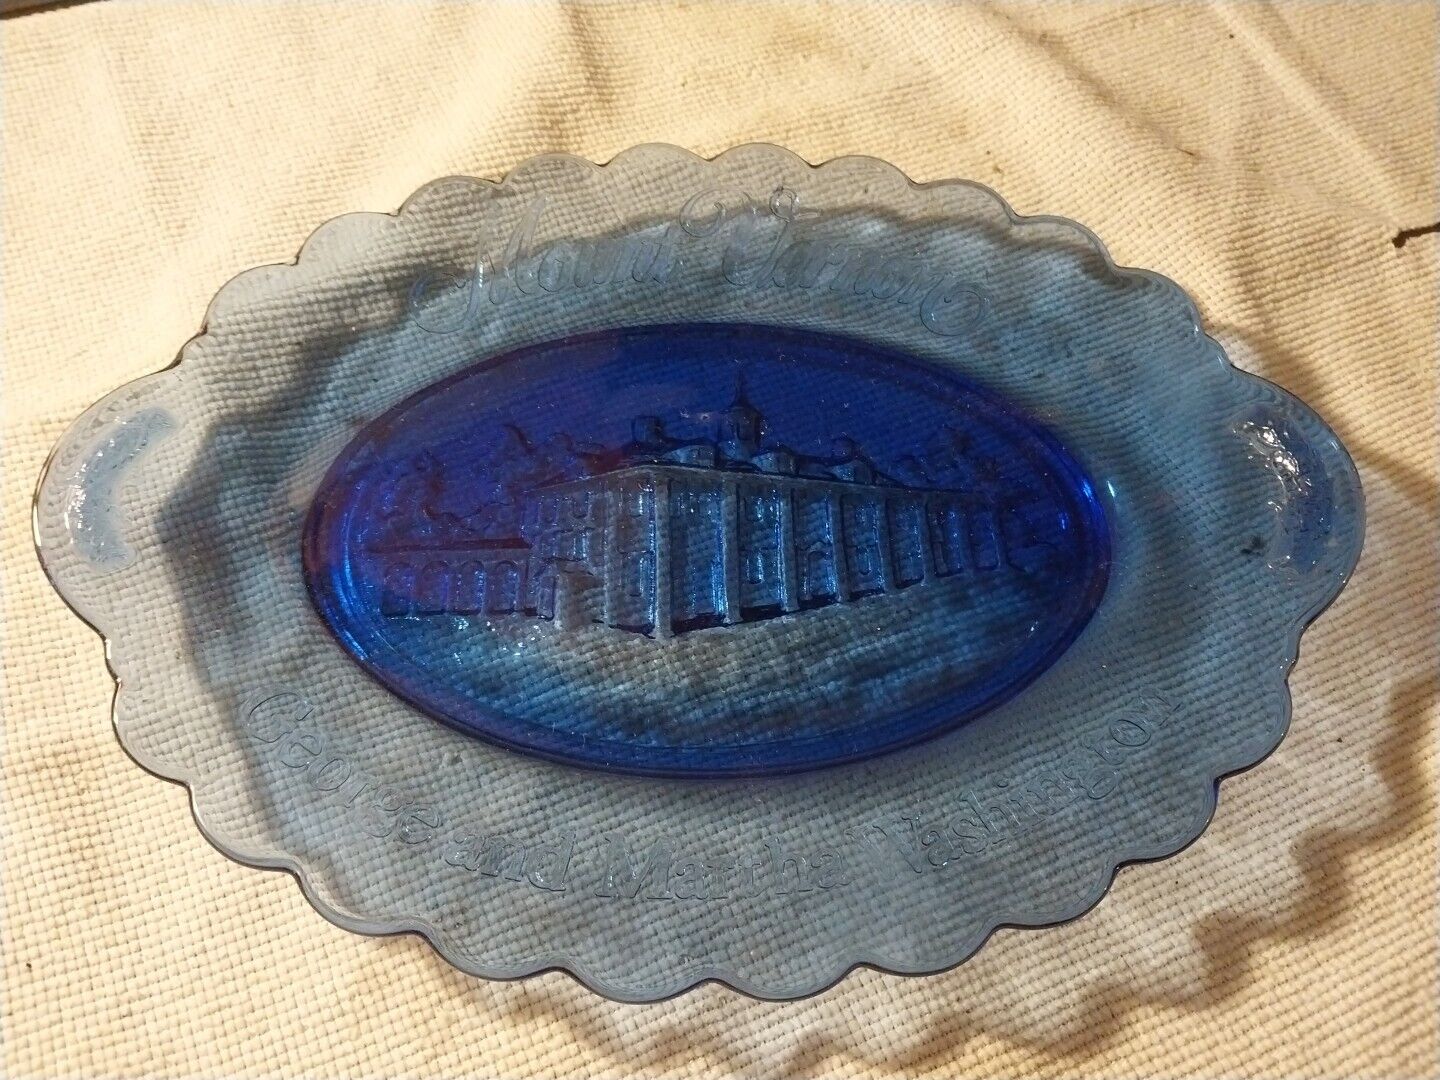 Avon Mount Vernon Blue Plate and Soaps** Avon Collection** 